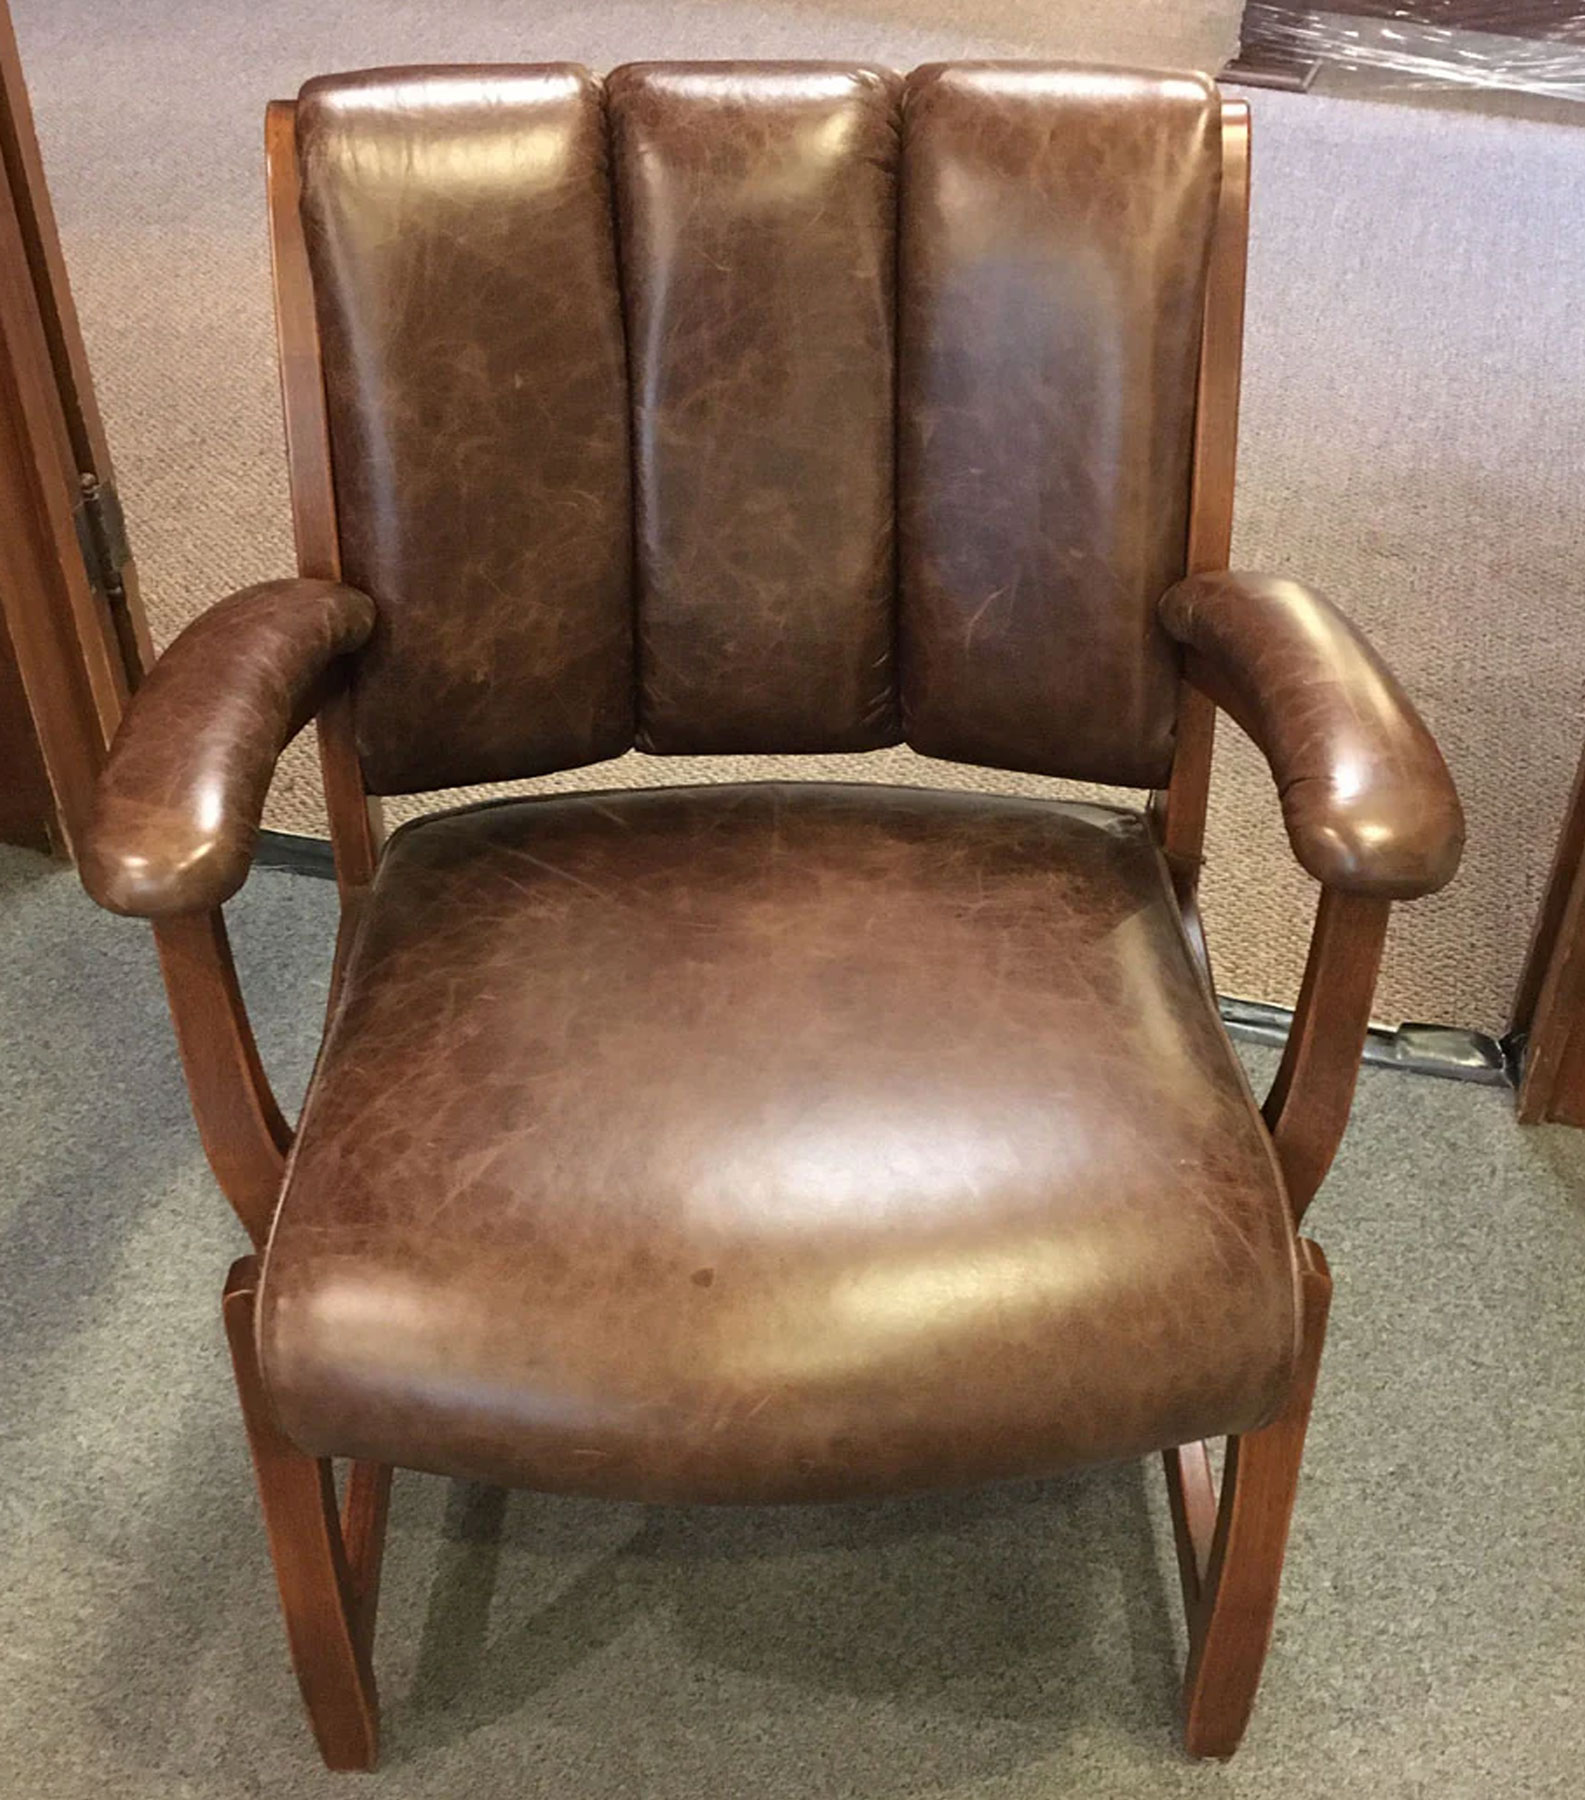 Edelweiss Client Arm Chair in Brown Maple with Capri Chocolate Leather